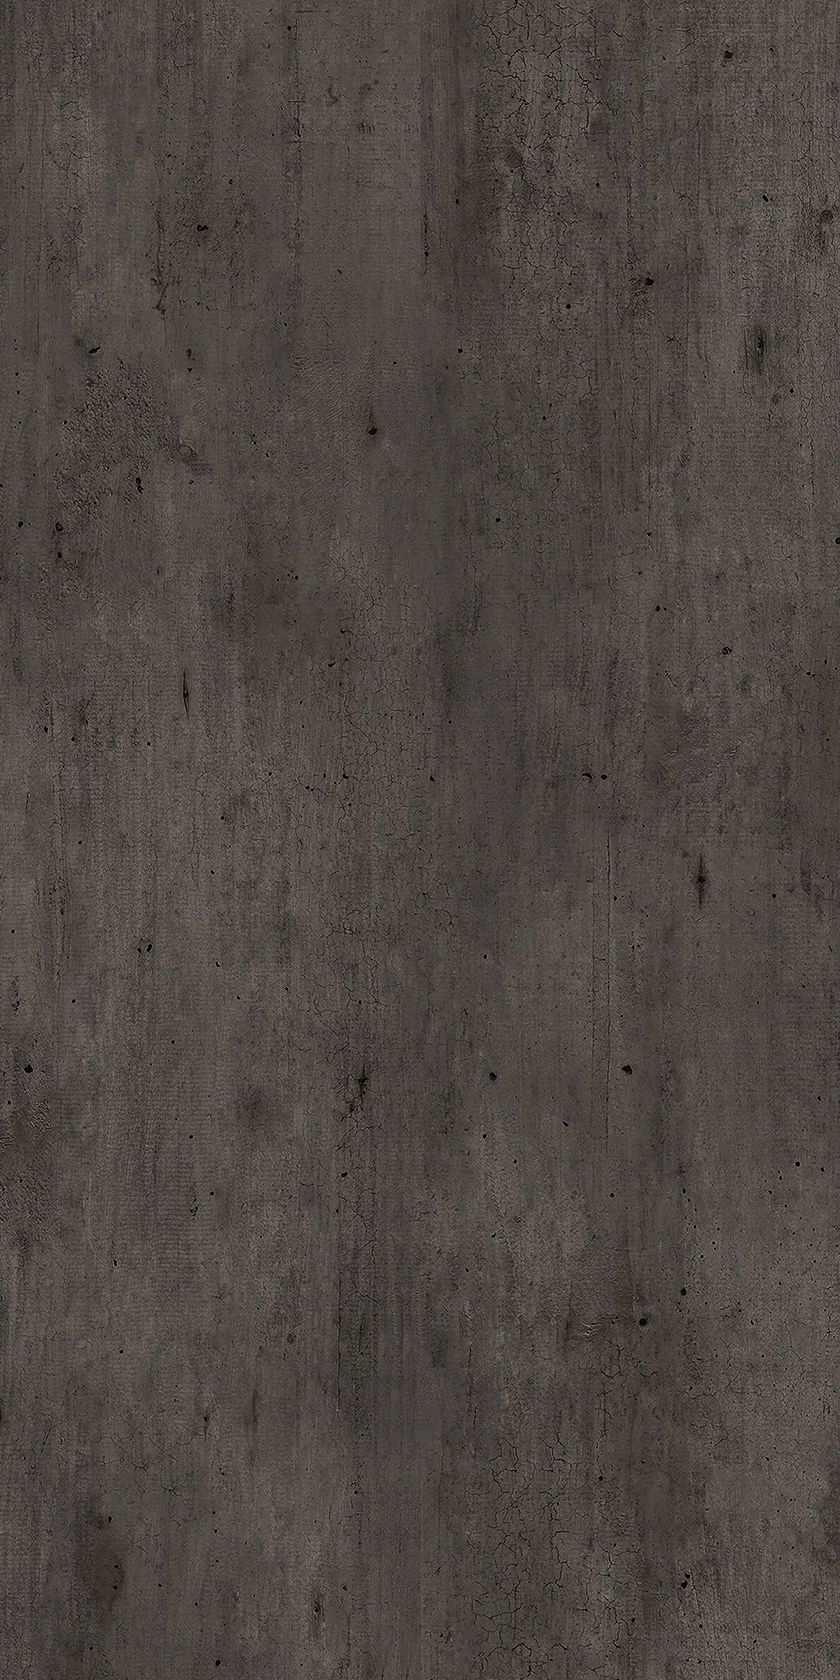 30316 Cracked Cemento Dark (SUD) exterior wall cladding panels from NewMika